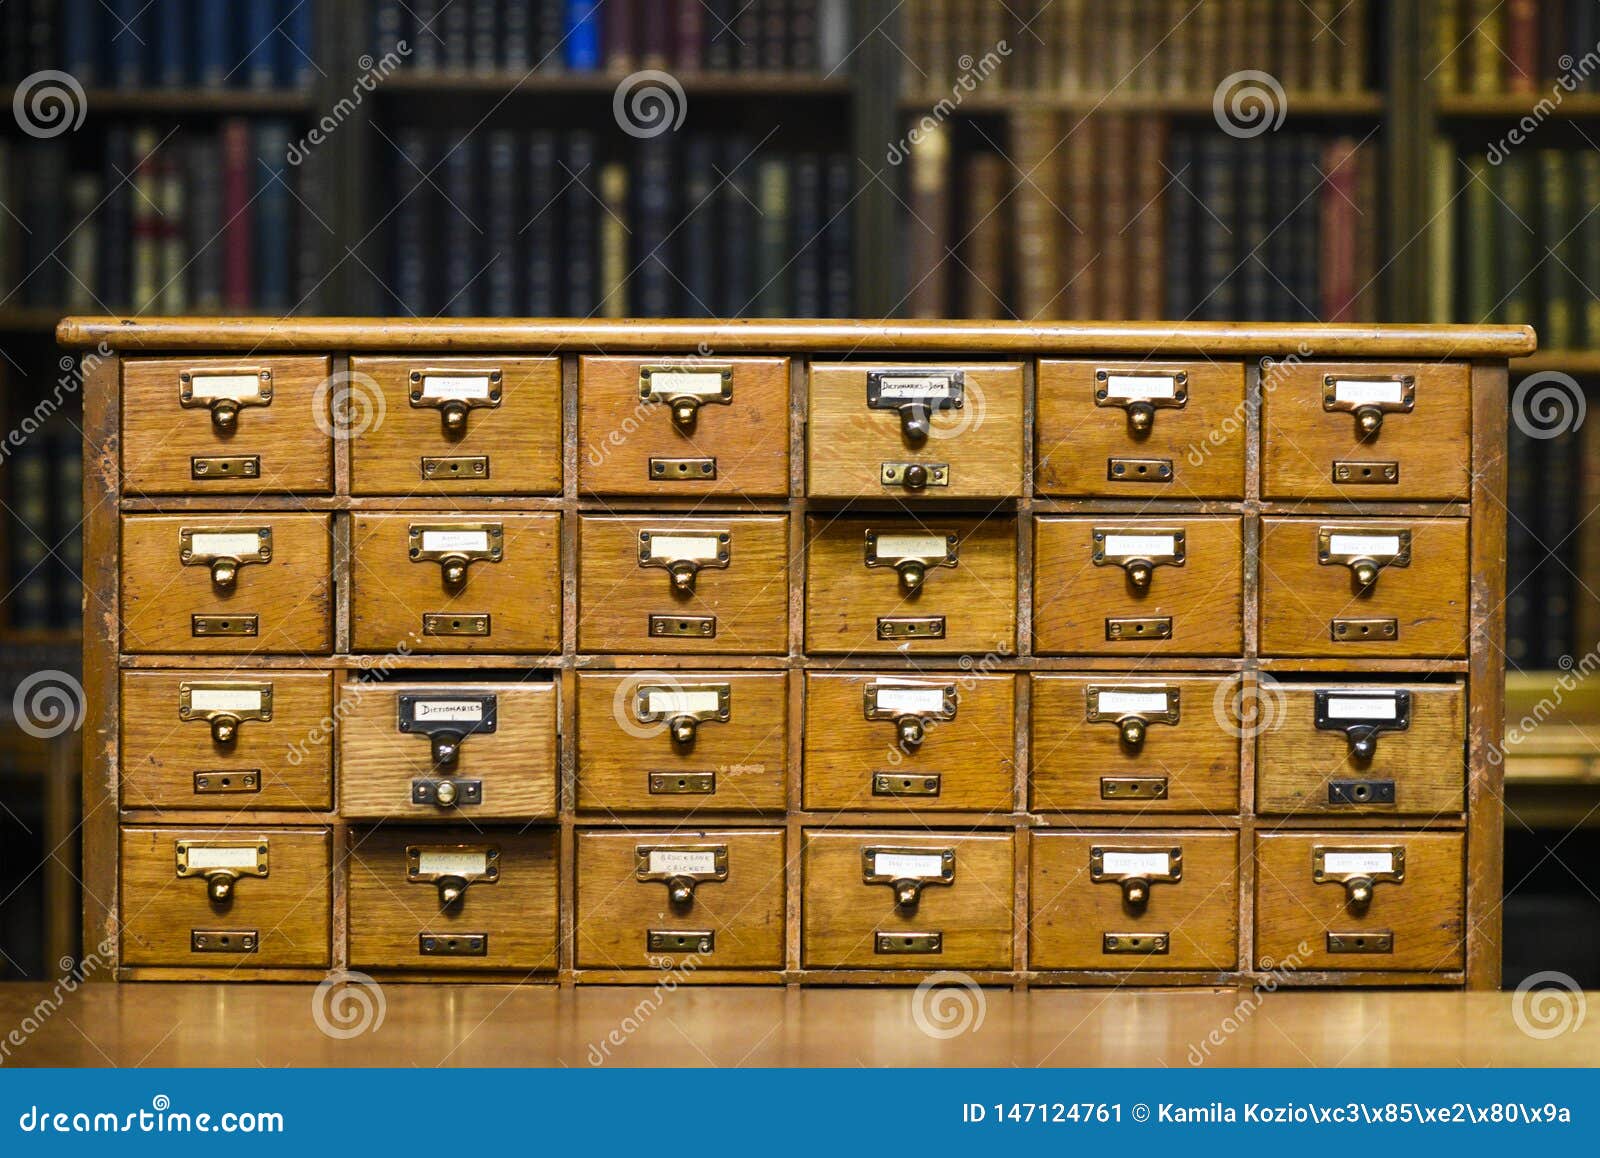 https://thumbs.dreamstime.com/z/drawers-to-search-book-records-library-147124761.jpg